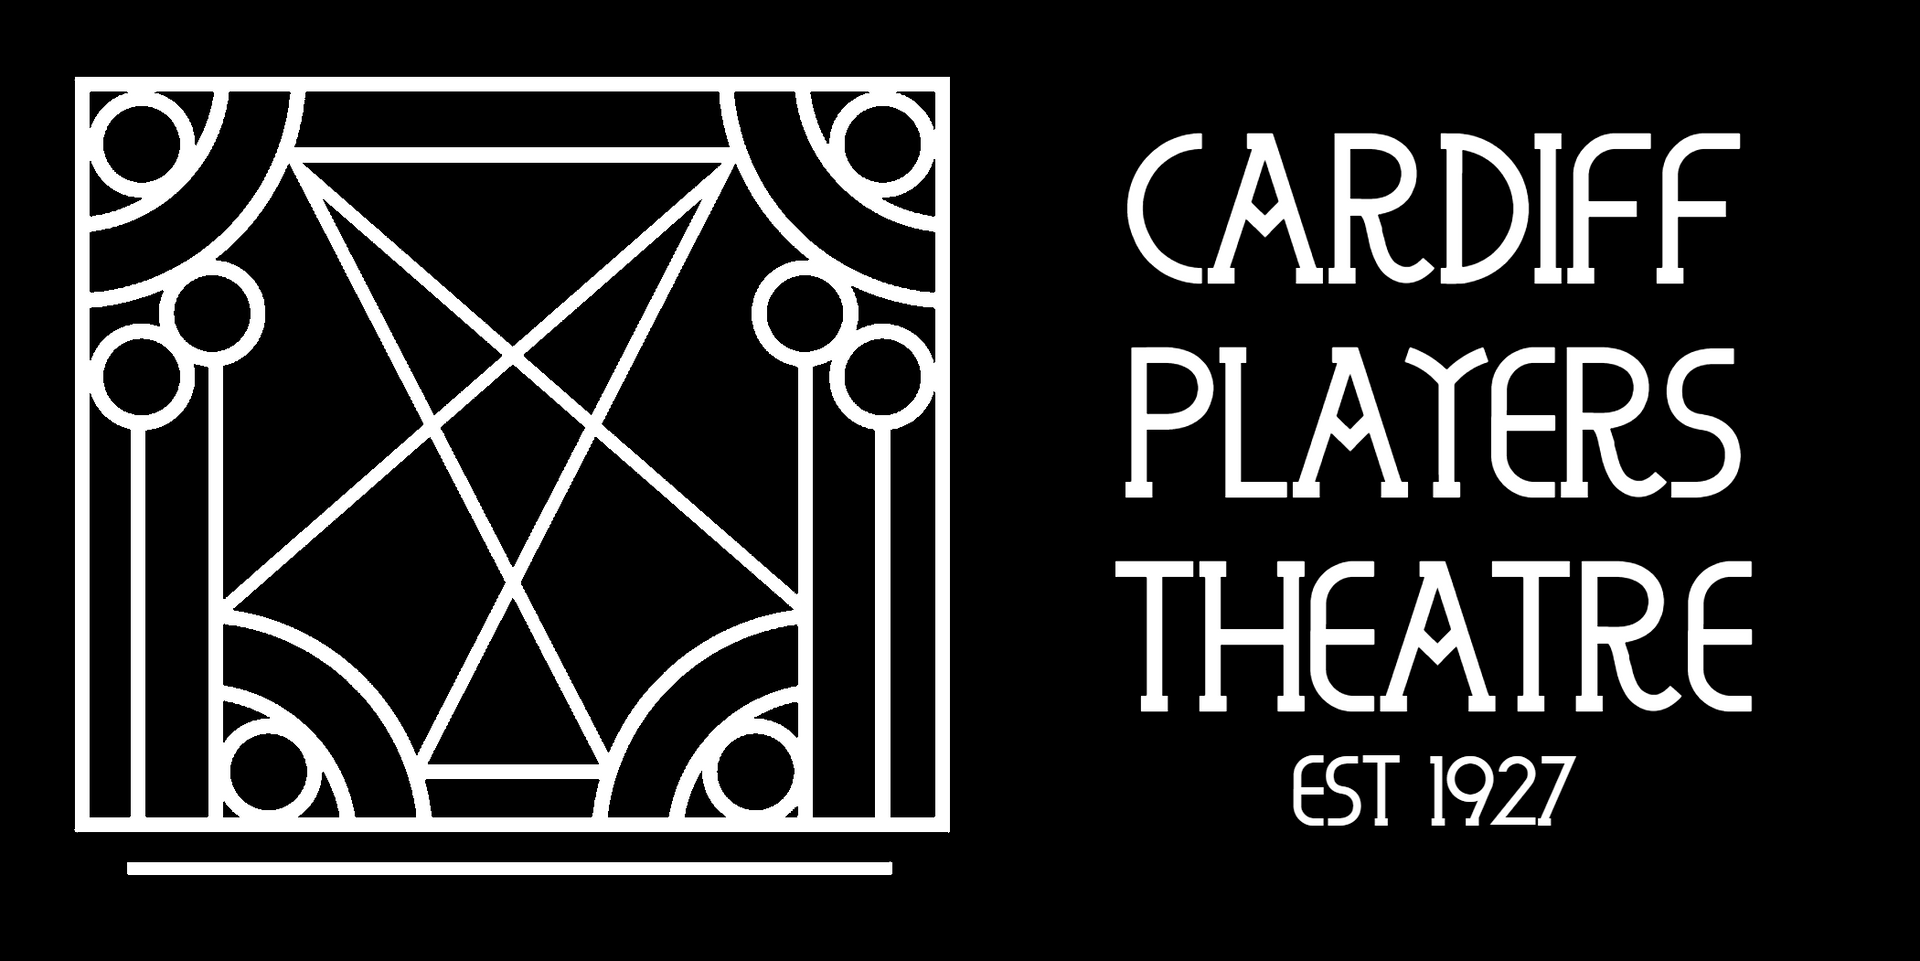 Cardiff Players Theatre 